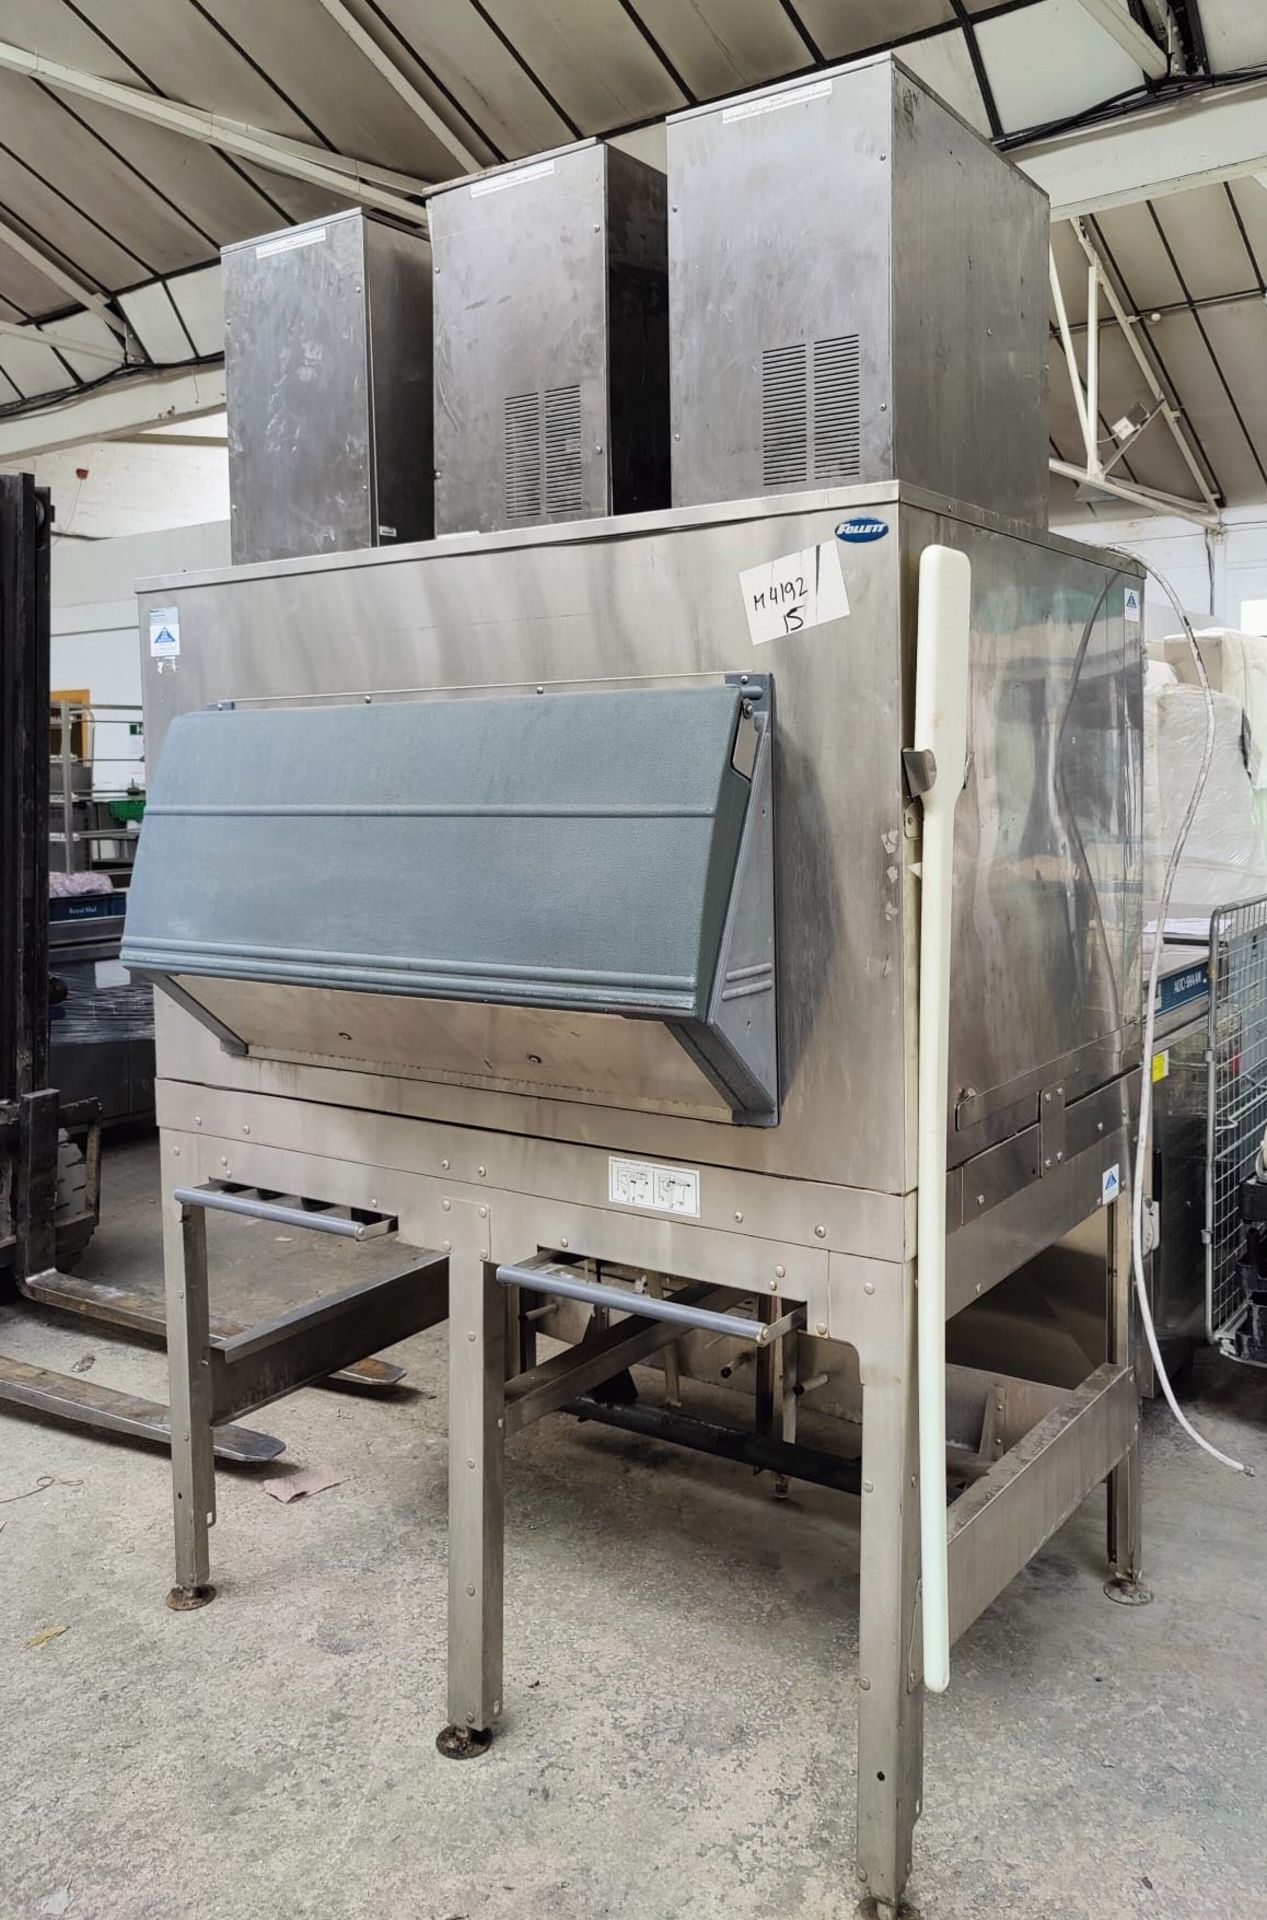 1 x Triple Head Commercial Ice Flaker Machine - Recently Removed From a Supermarket Environment - Image 8 of 11